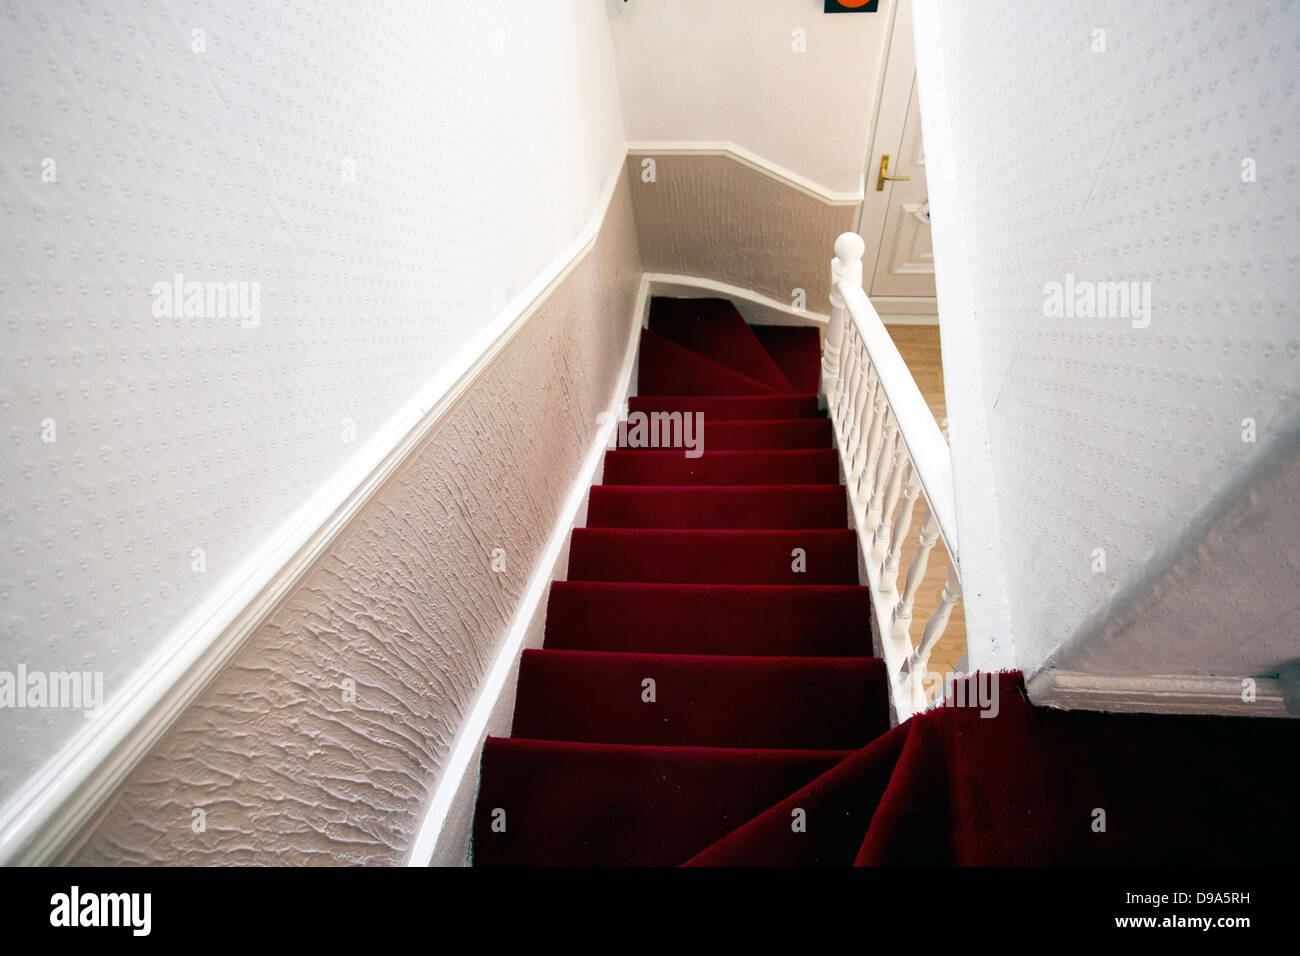 View from the landing in a traditional terraced house Stock Photo